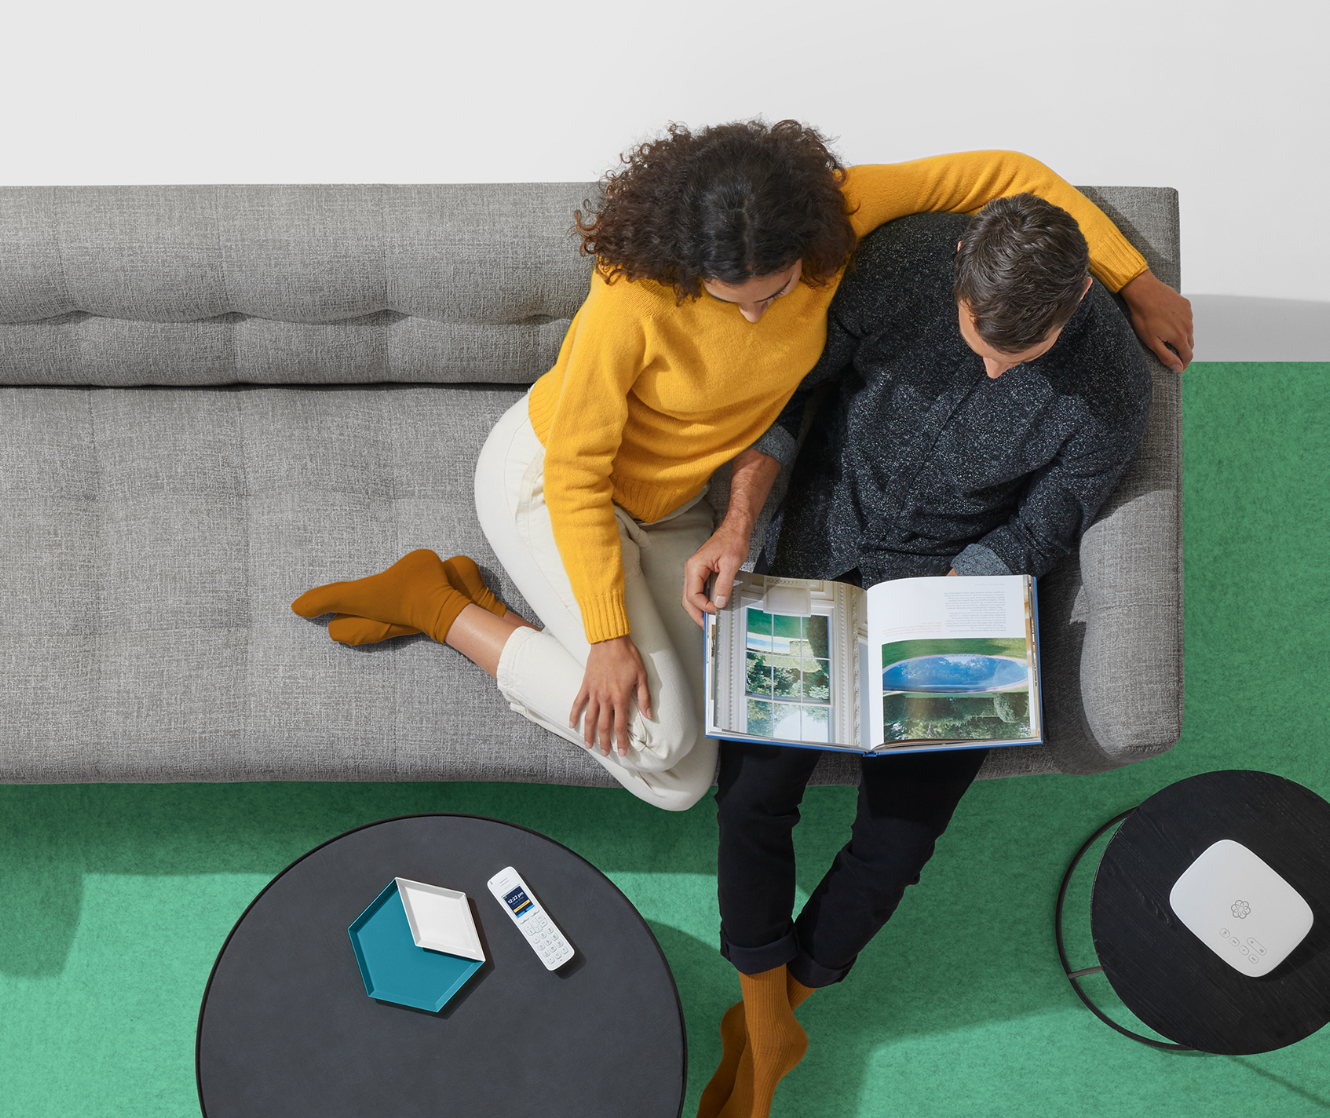 An image of a couple sitting down on sofa, telo handset on the side table